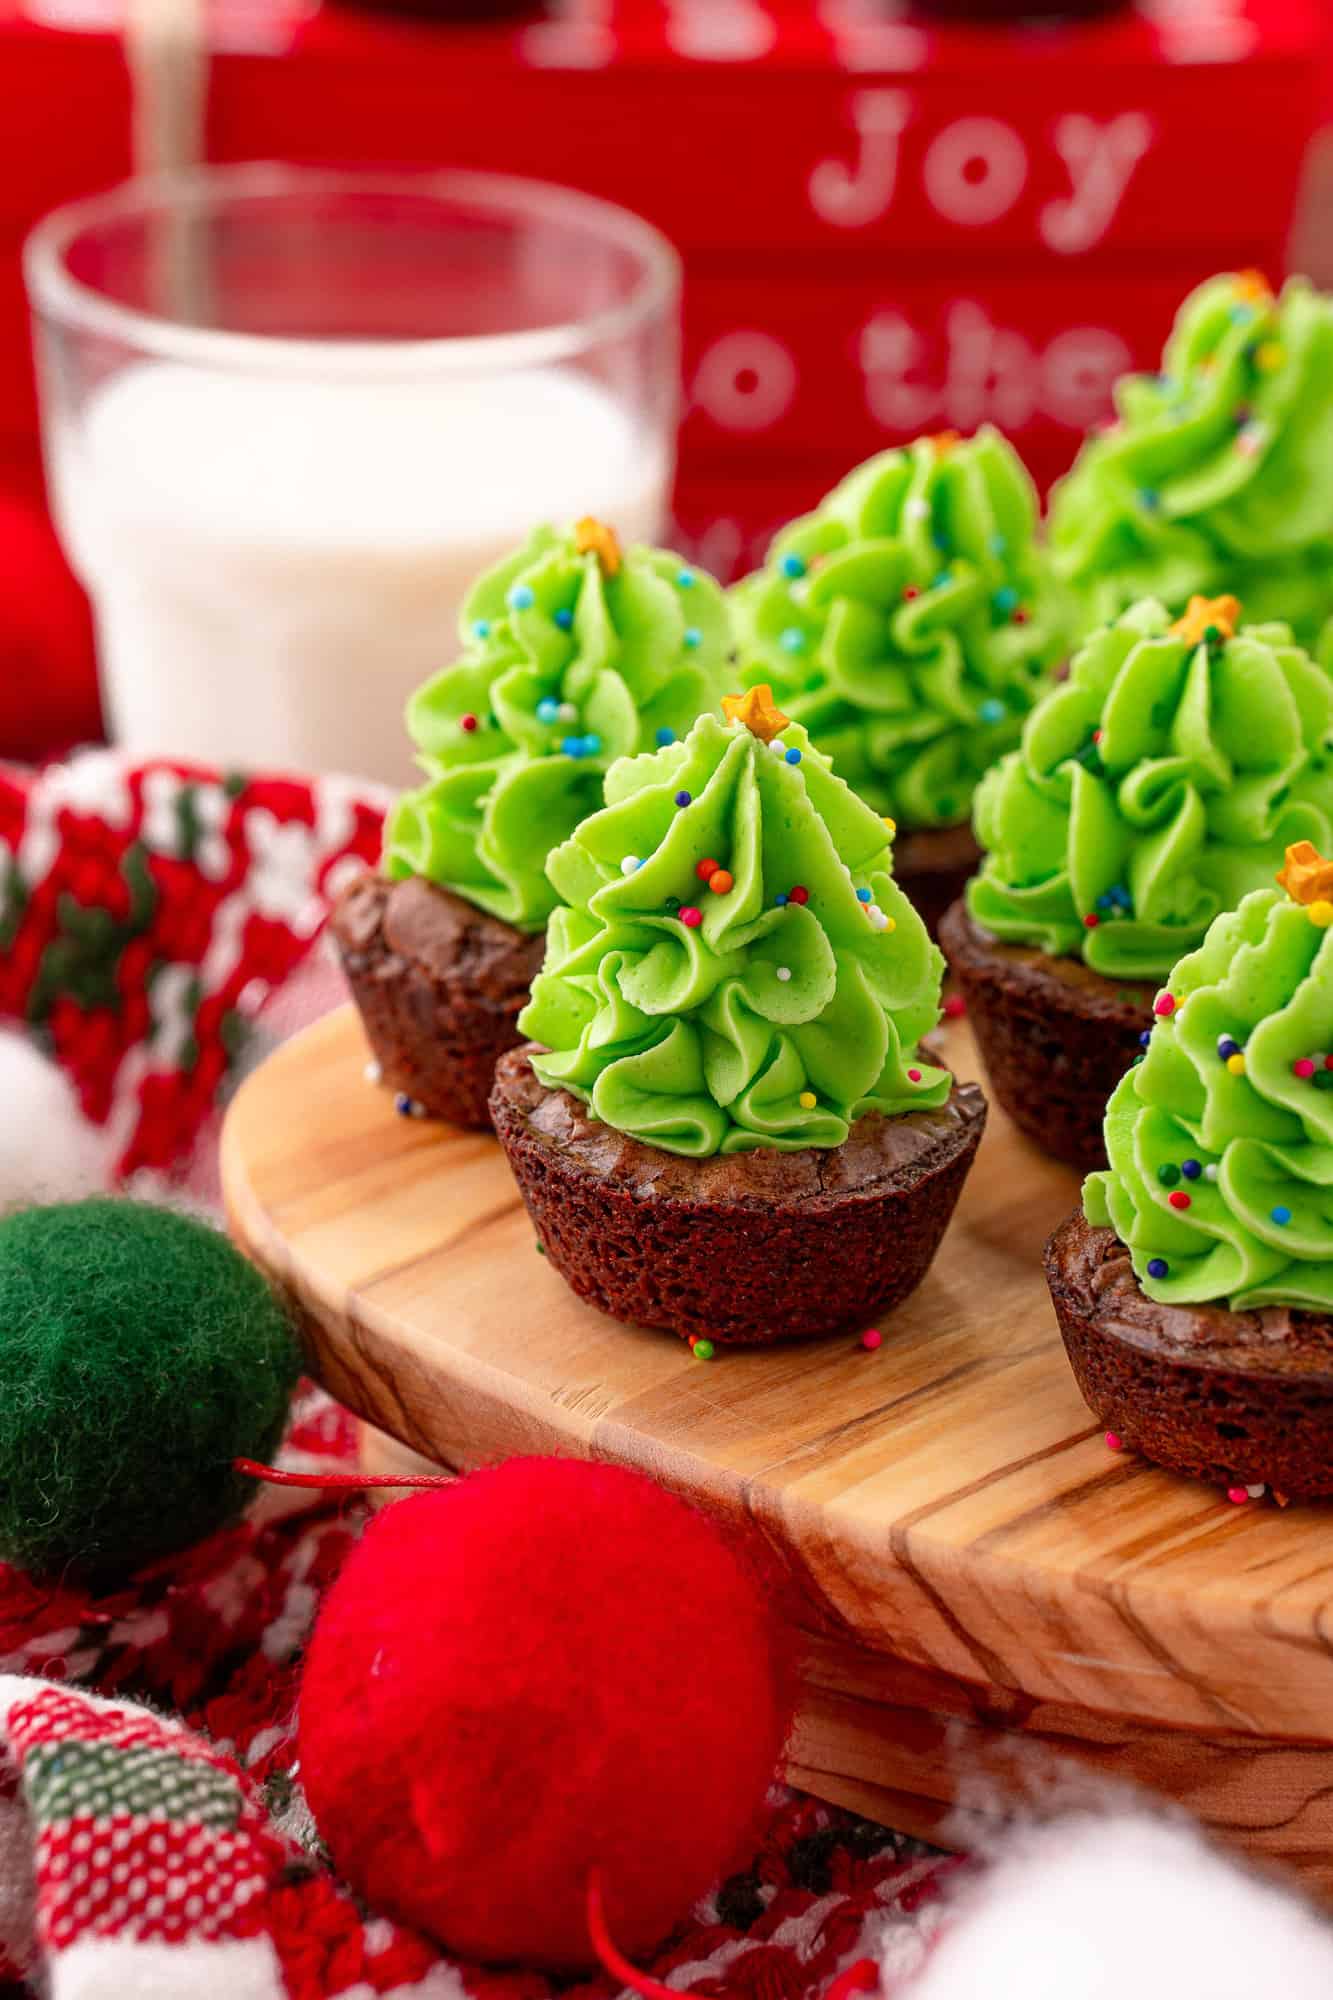 Mini brownies topped with frosting to look like christmas trees.